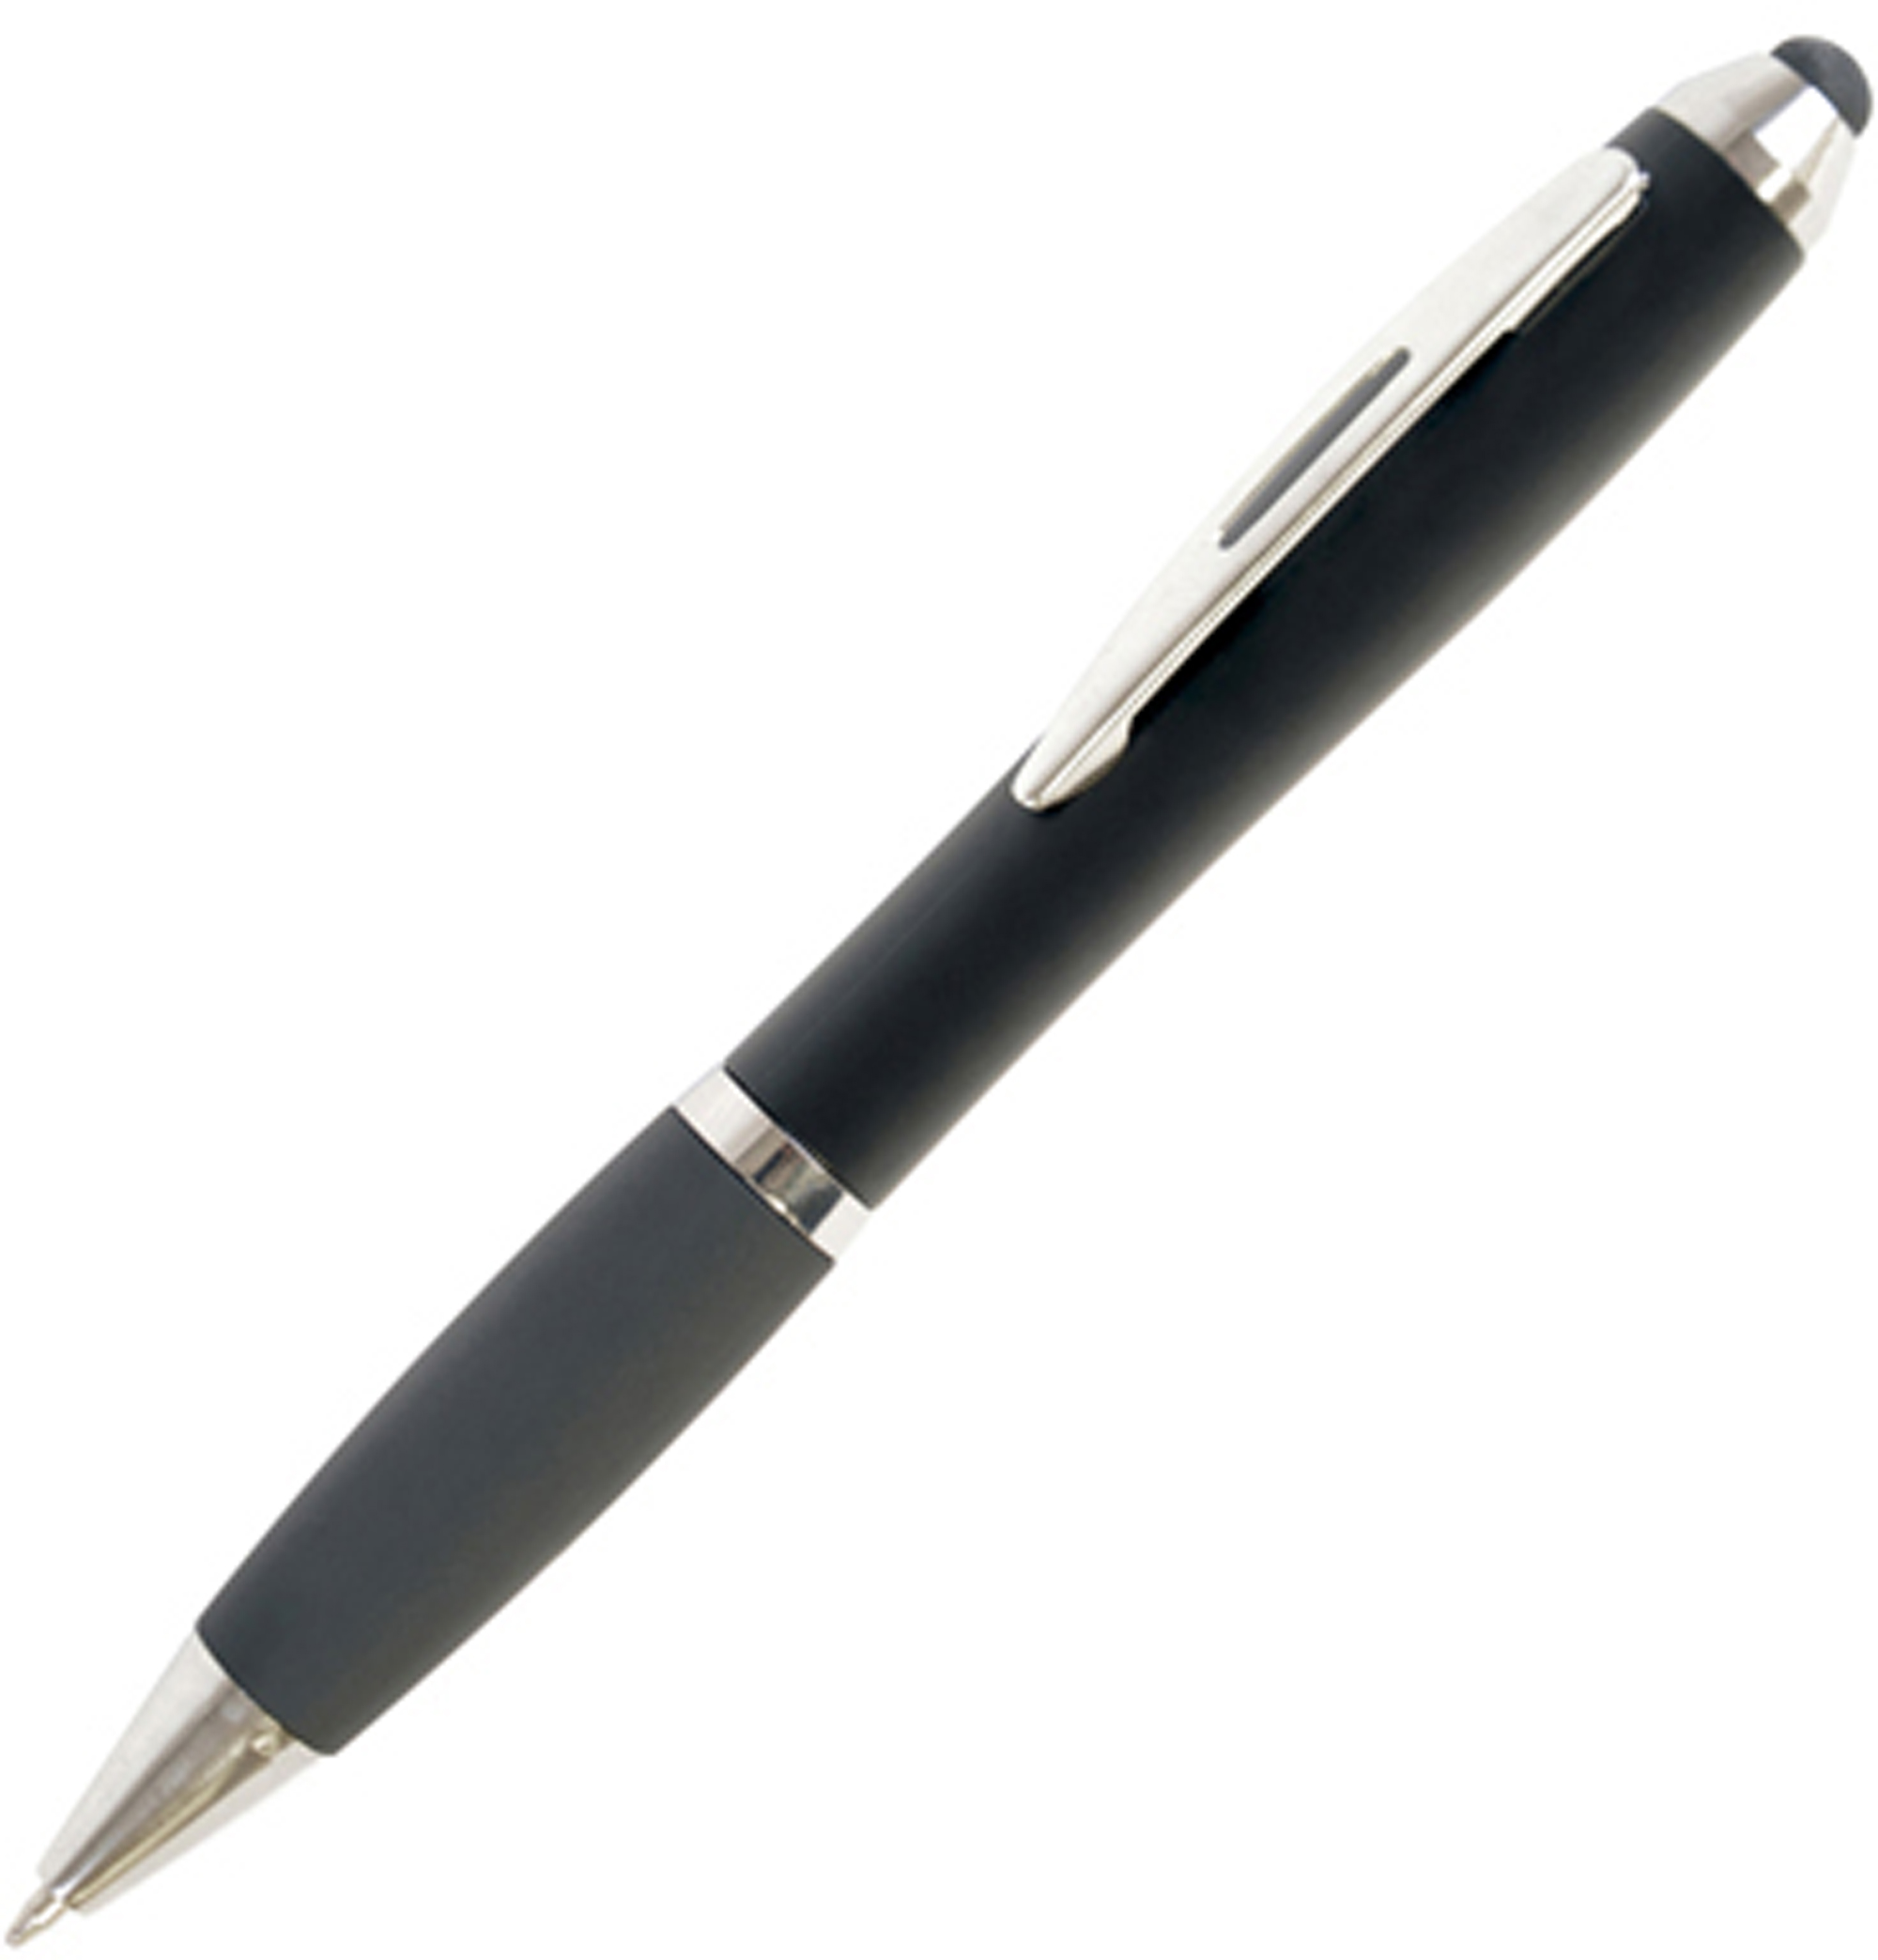 A curvy twist action ball pen with a soft stylus end piece (All Black). Black Ink.